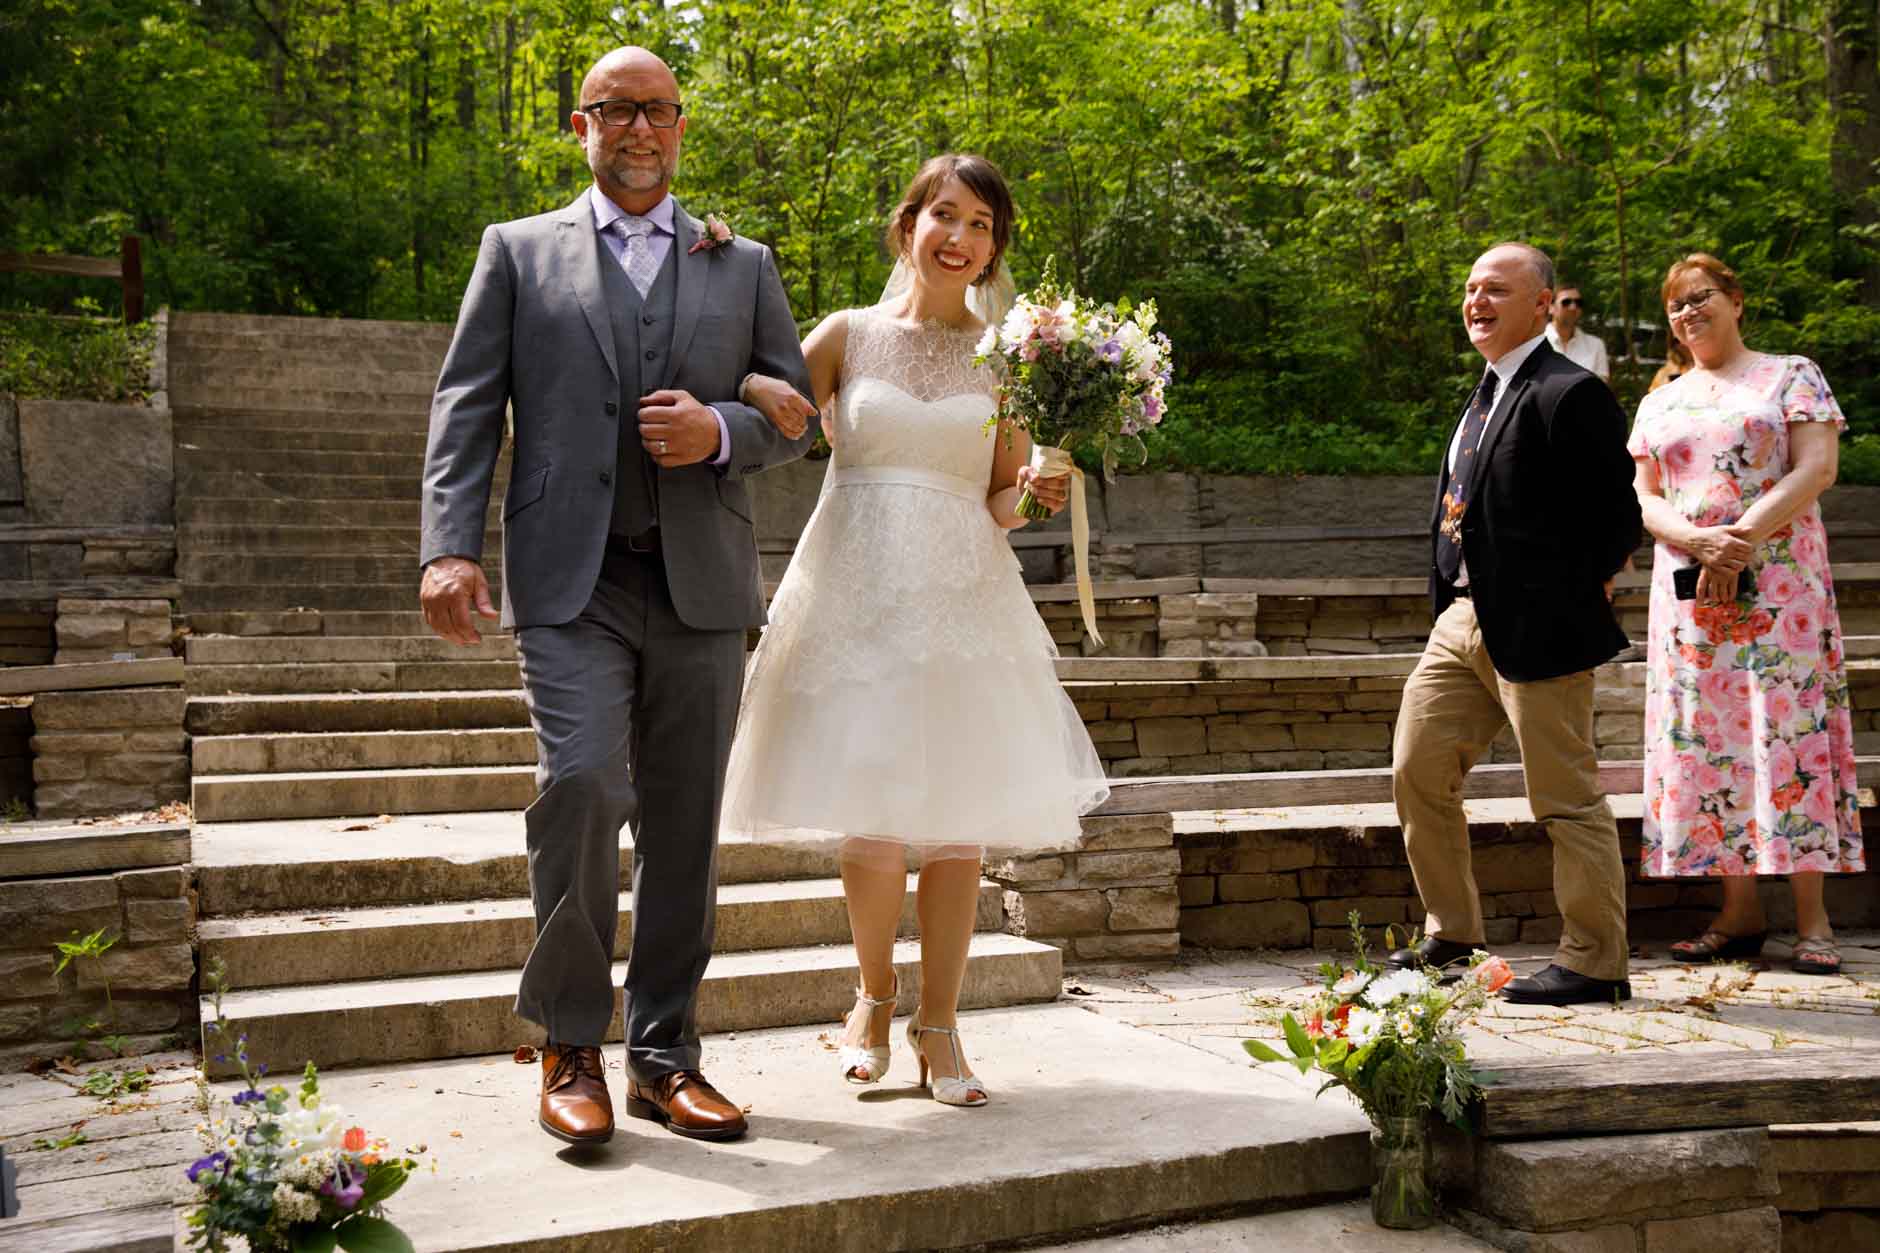 Scenes from the wedding of Joe Toth and Kirstin Wade at McCormick's Creek State Park near Spencer, Indiana on Saturday, May 12, 2018. (Photo by James Brosher)